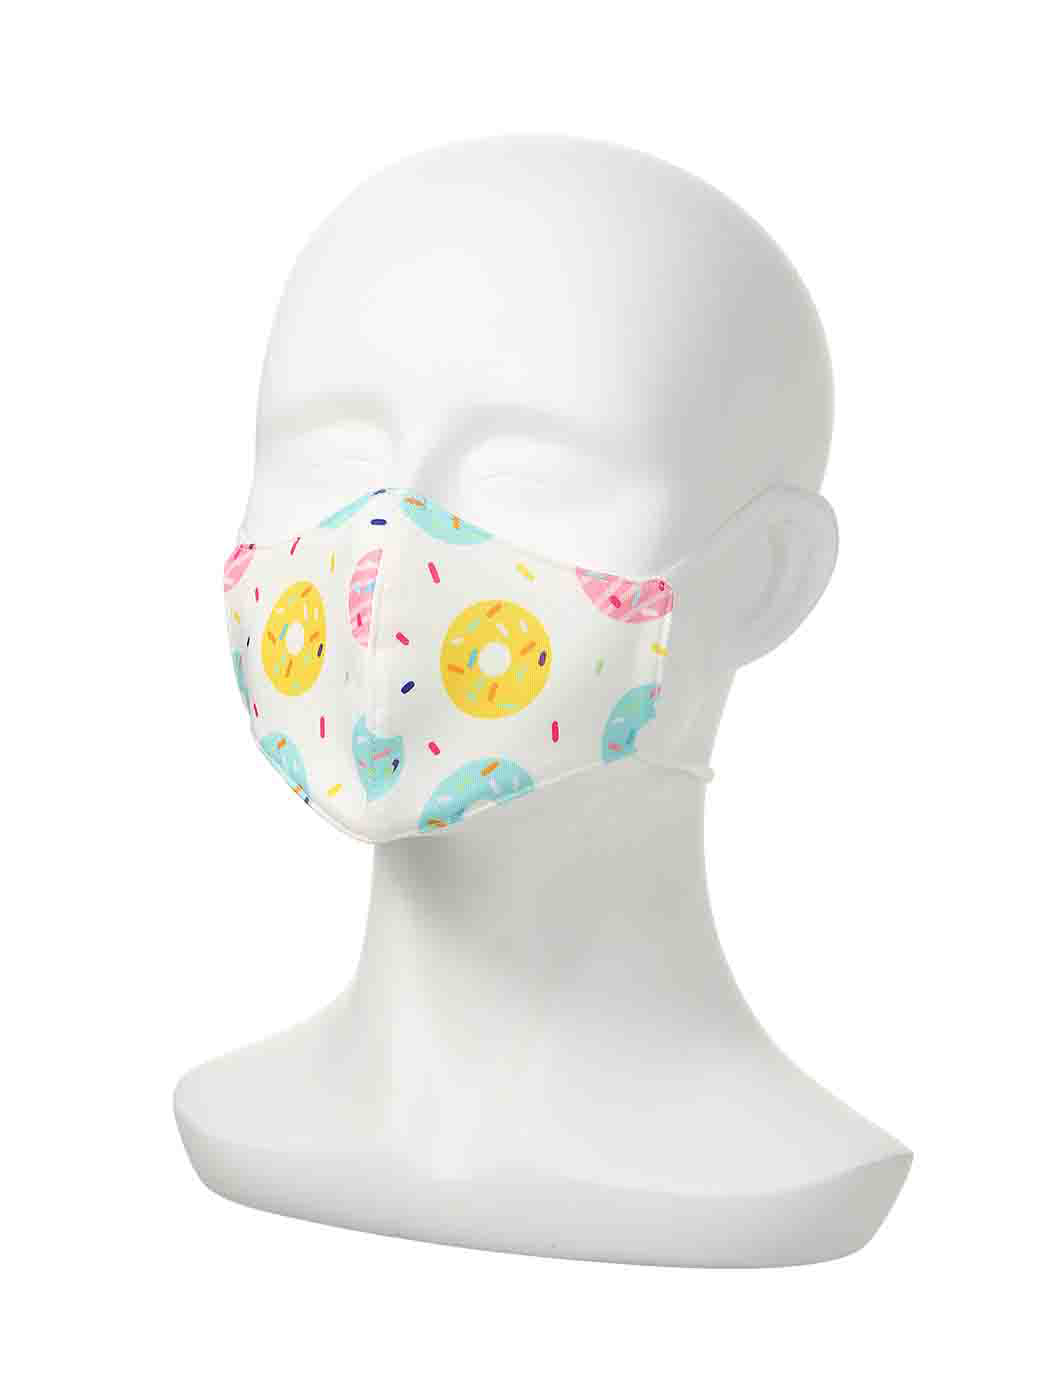 MINISO DESSERT SHOP SERIES PRINTED FACE MASK FOR KIDS (DONUT) 2010516110108 MOUTH MASK